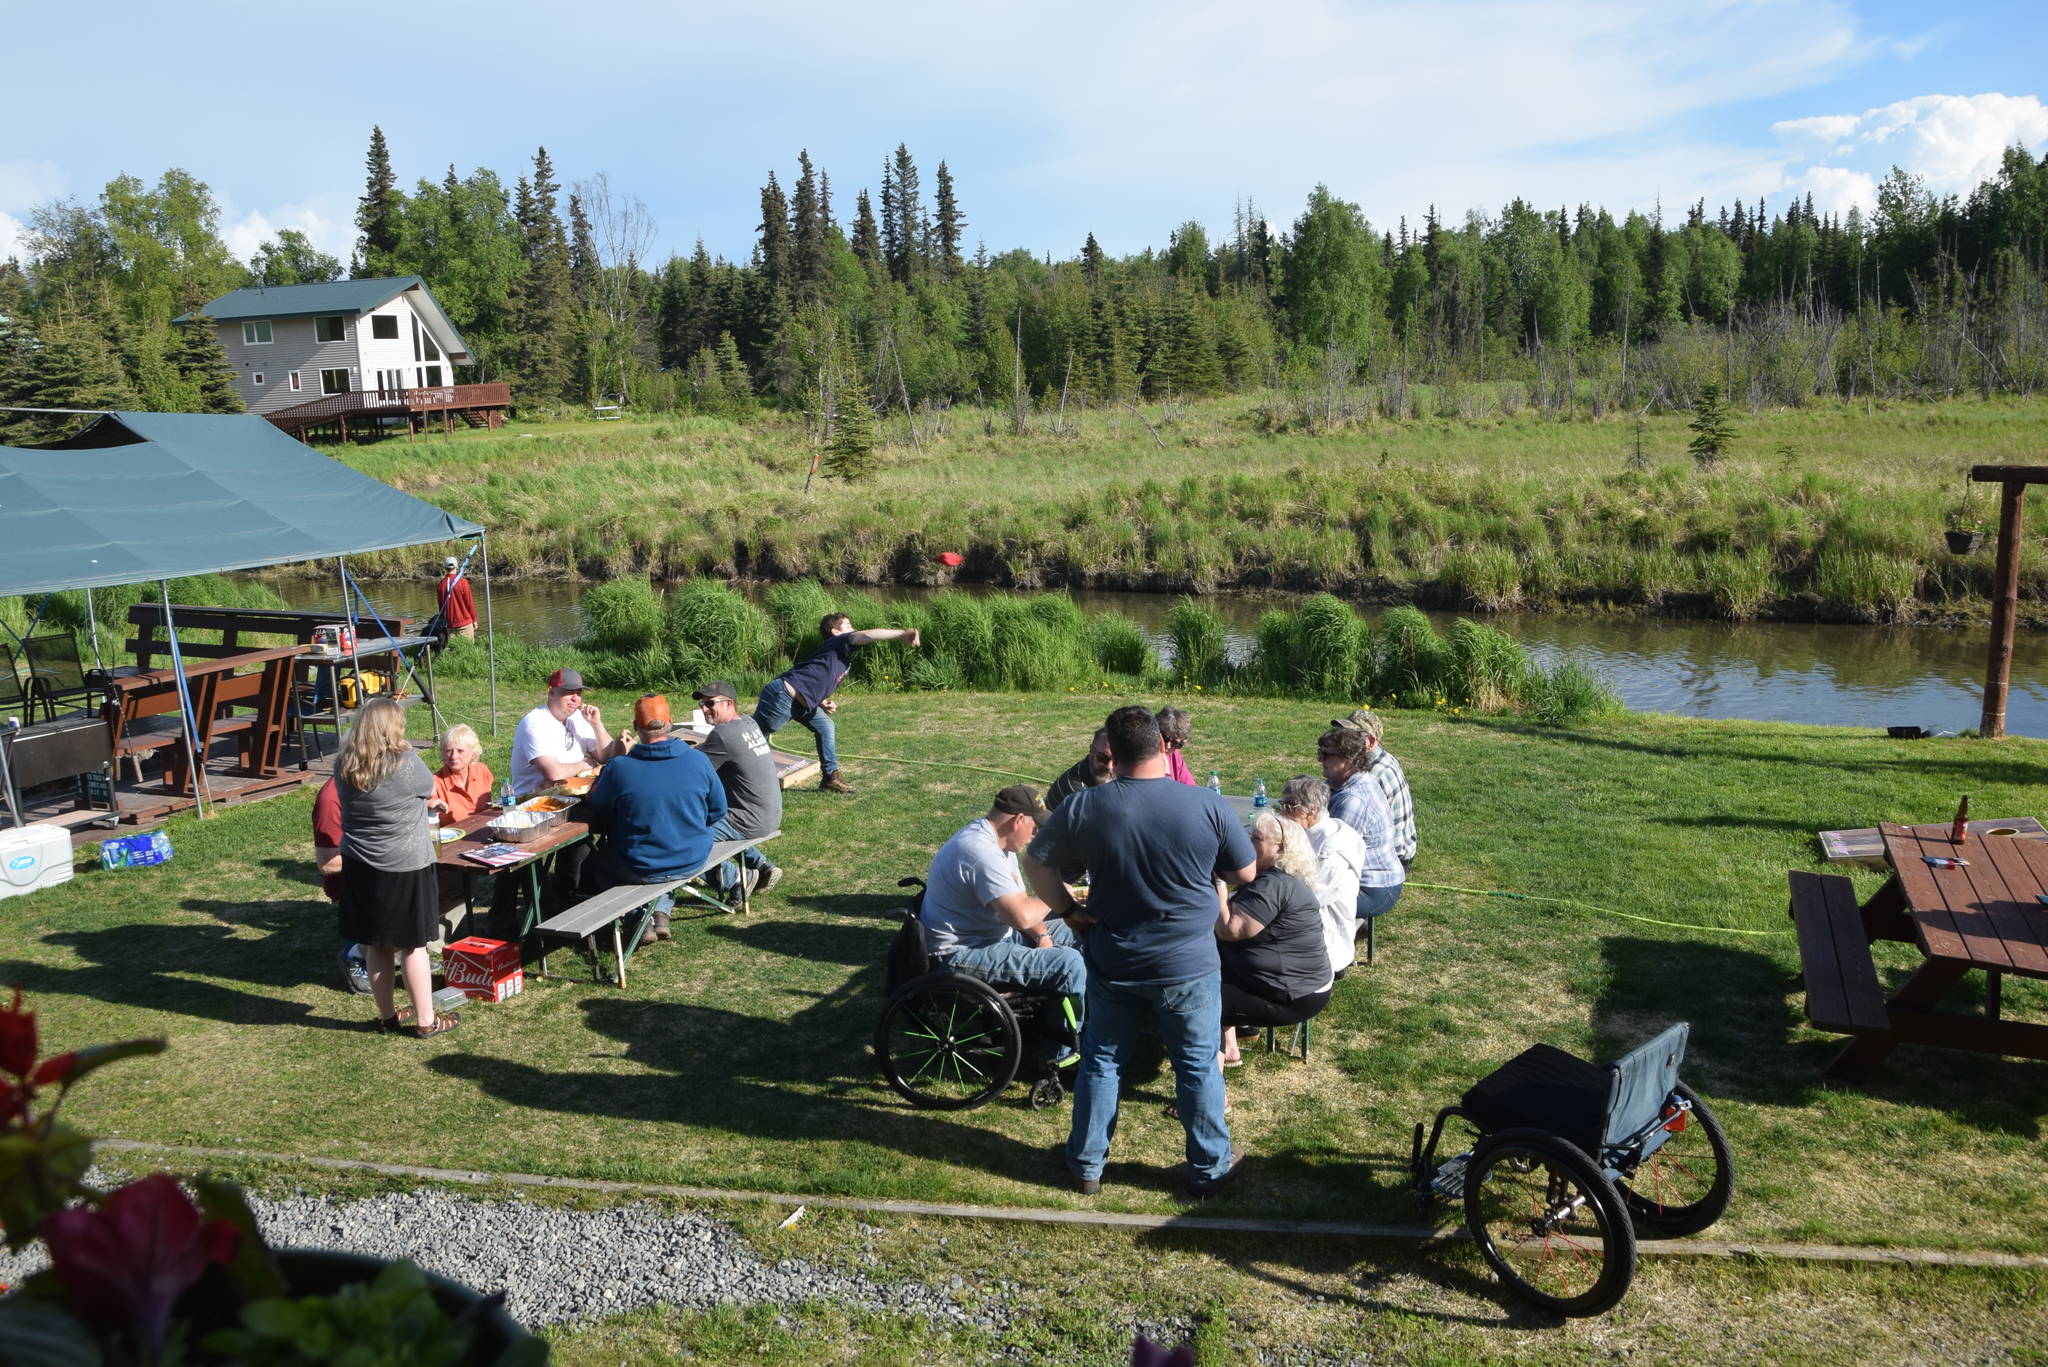 Veterans and volunteers enjoy a cookout together as part of HAVE-Alaska’s 2019 fishing trip in Soldotna, Alaska, on Wednesday, June 5, 2019. (Photo by Brian Mazurek/Peninsula Clarion)